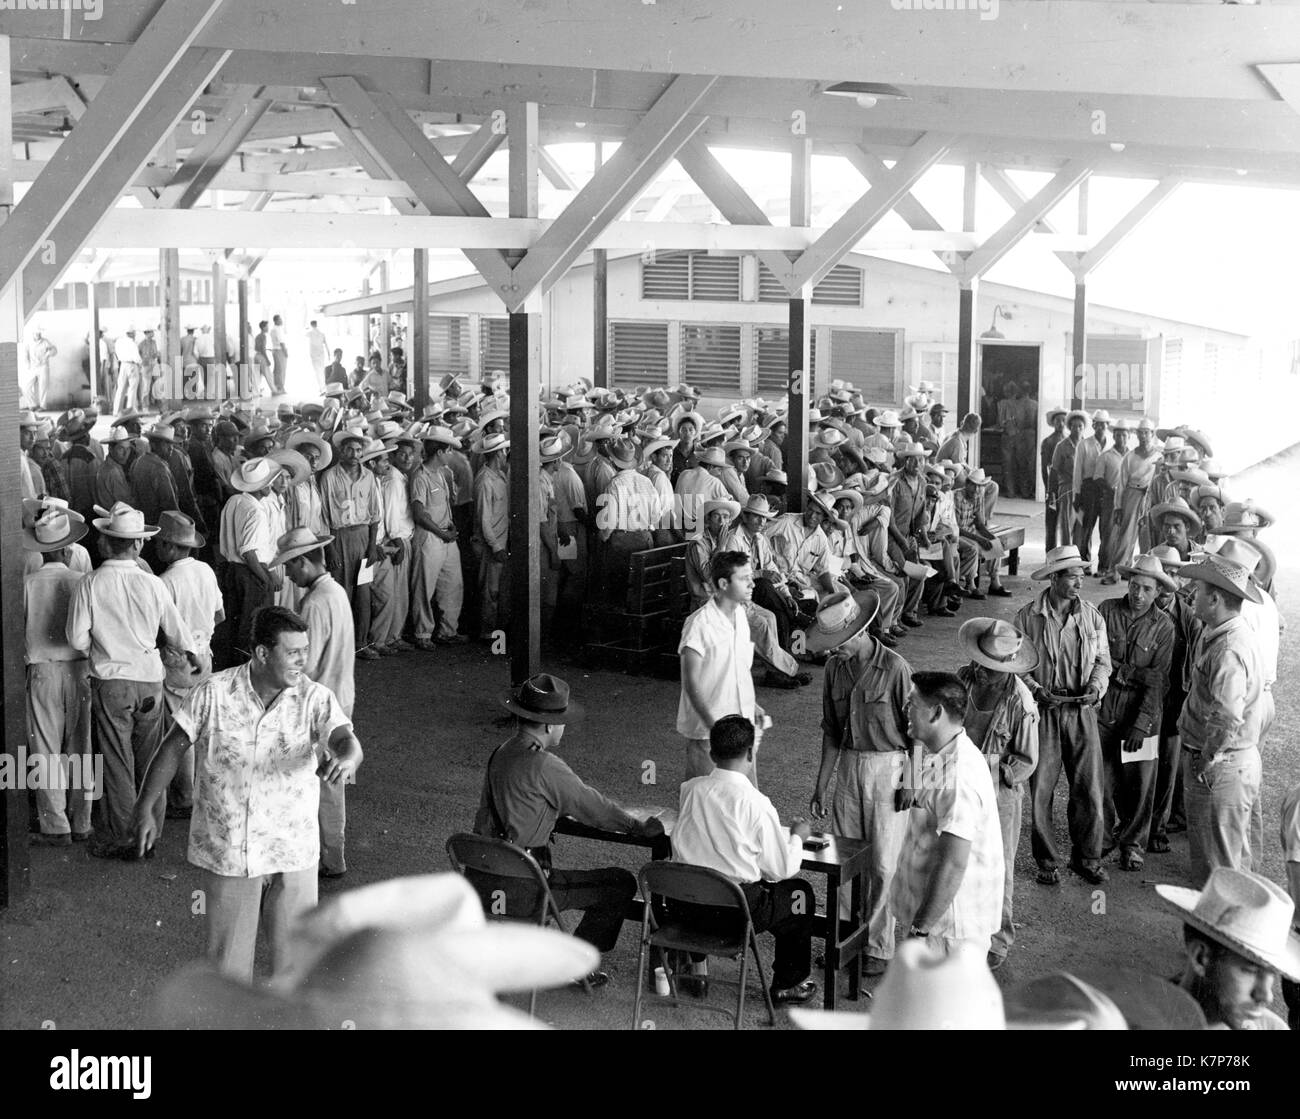 Braceros seeking temporary farm work in the United States gathered at labor centers along the border for processing, 01/01/1957. Stock Photo